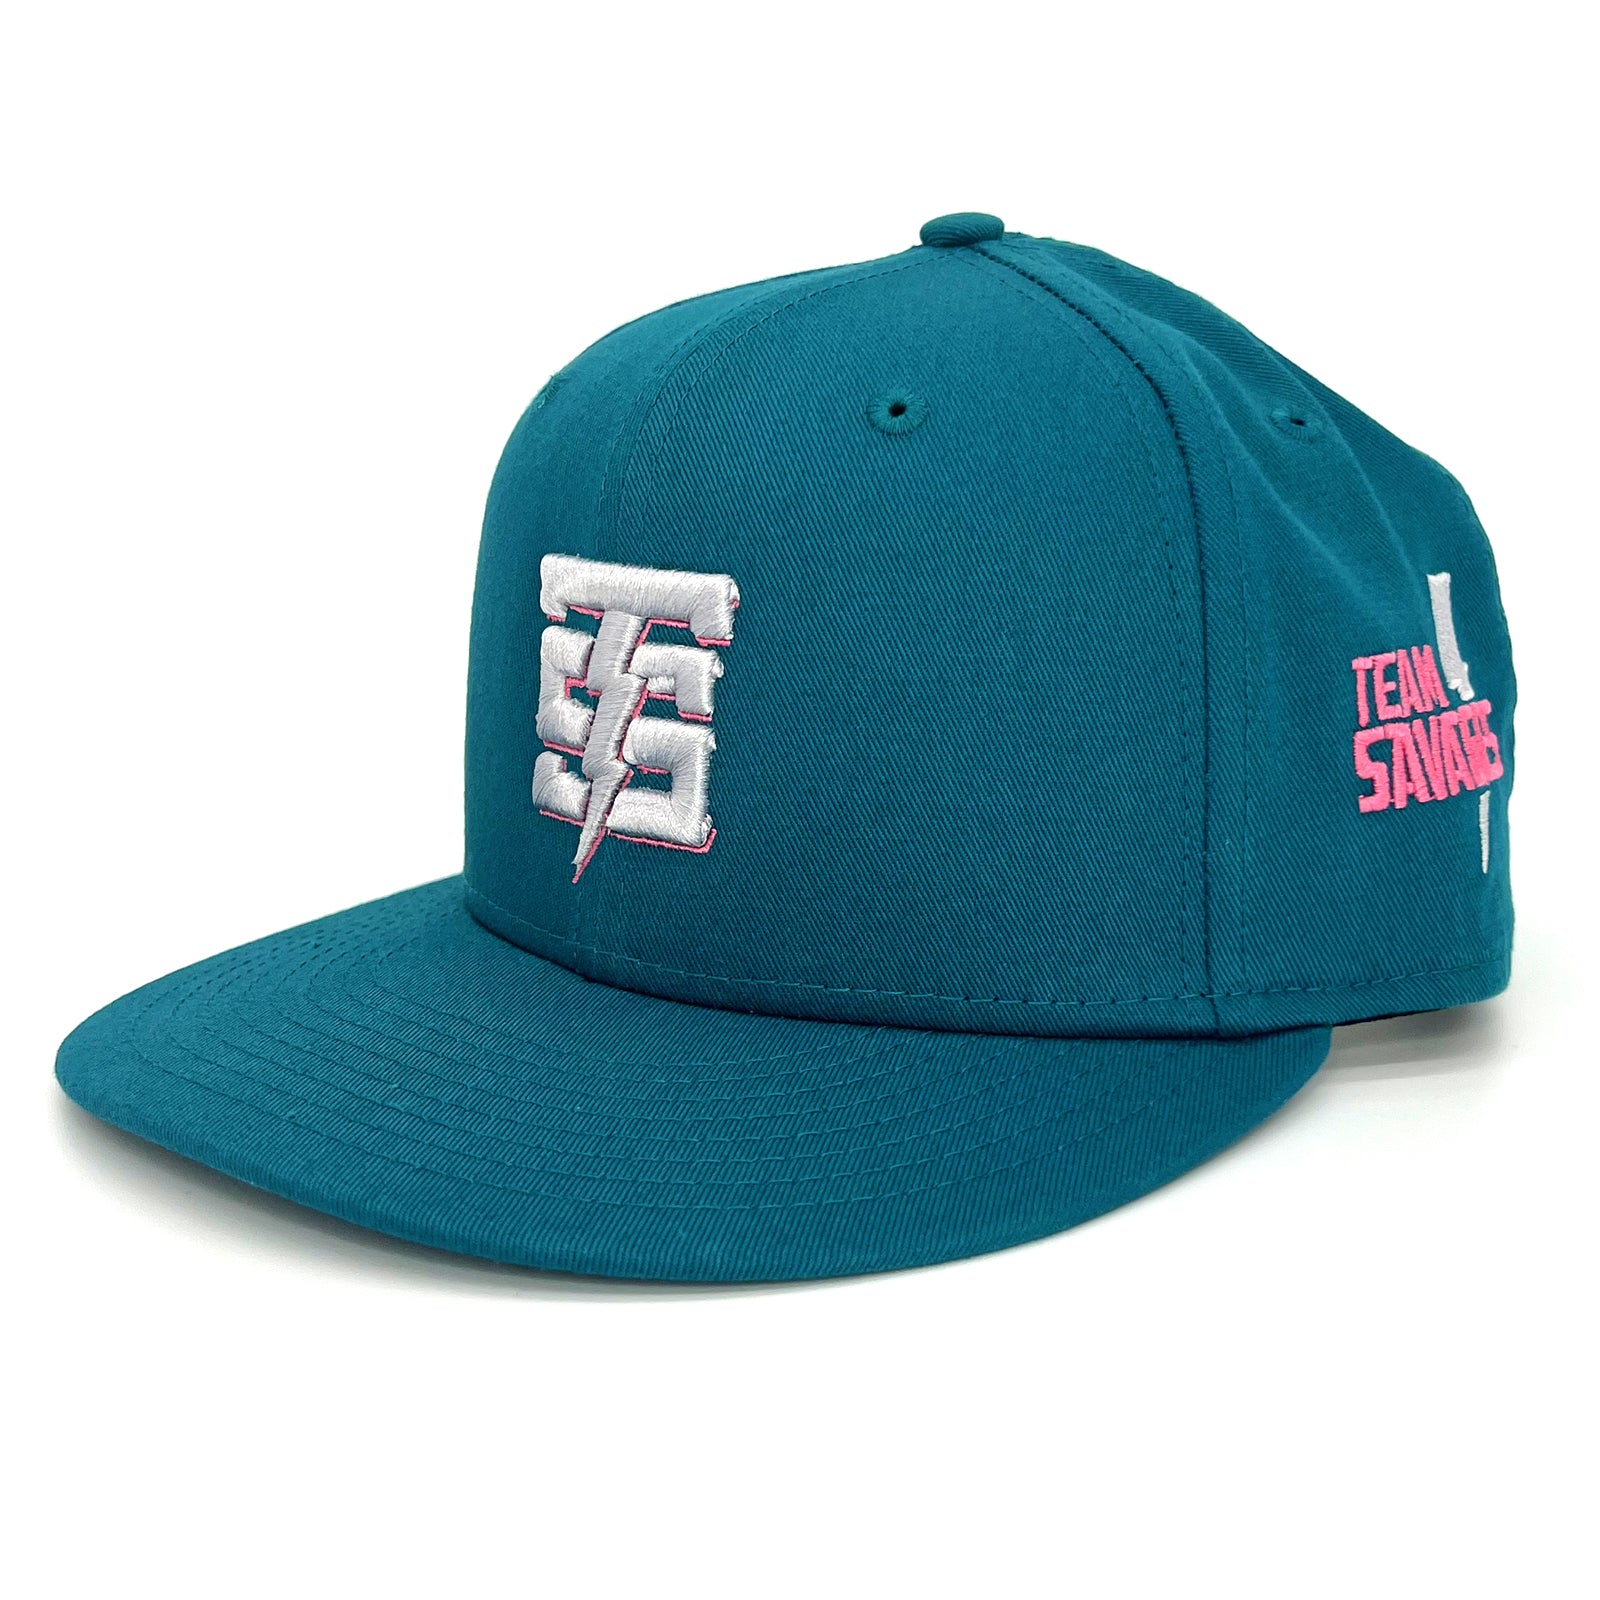 Team Savages x New Era Snapback: Teal / Cotton Candy